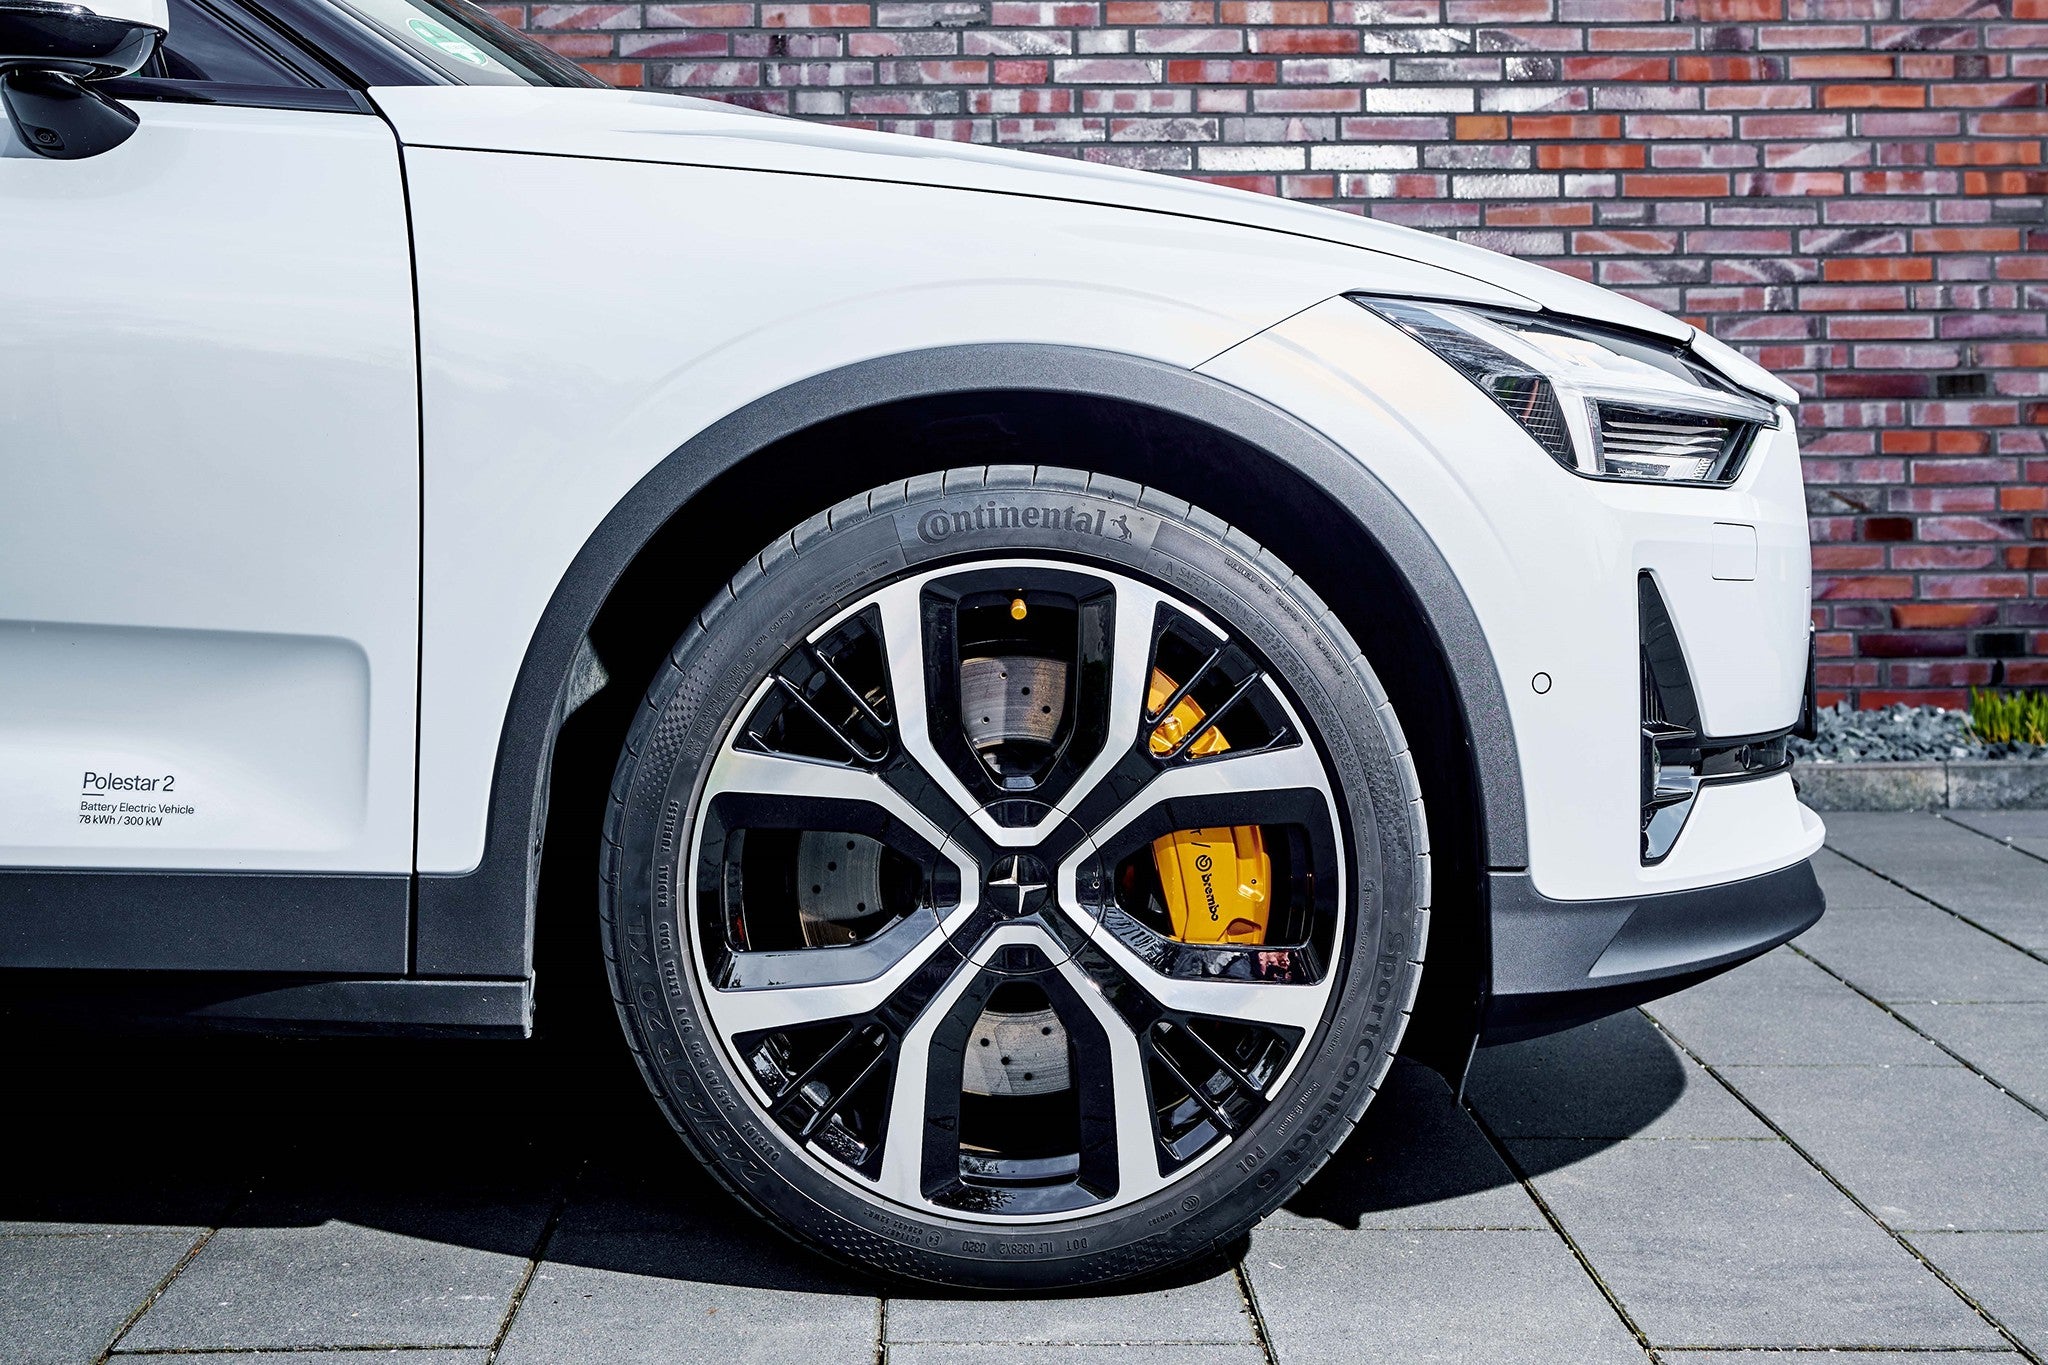 A Continental original equipment tire on the Polestar 2 electric vehicle.